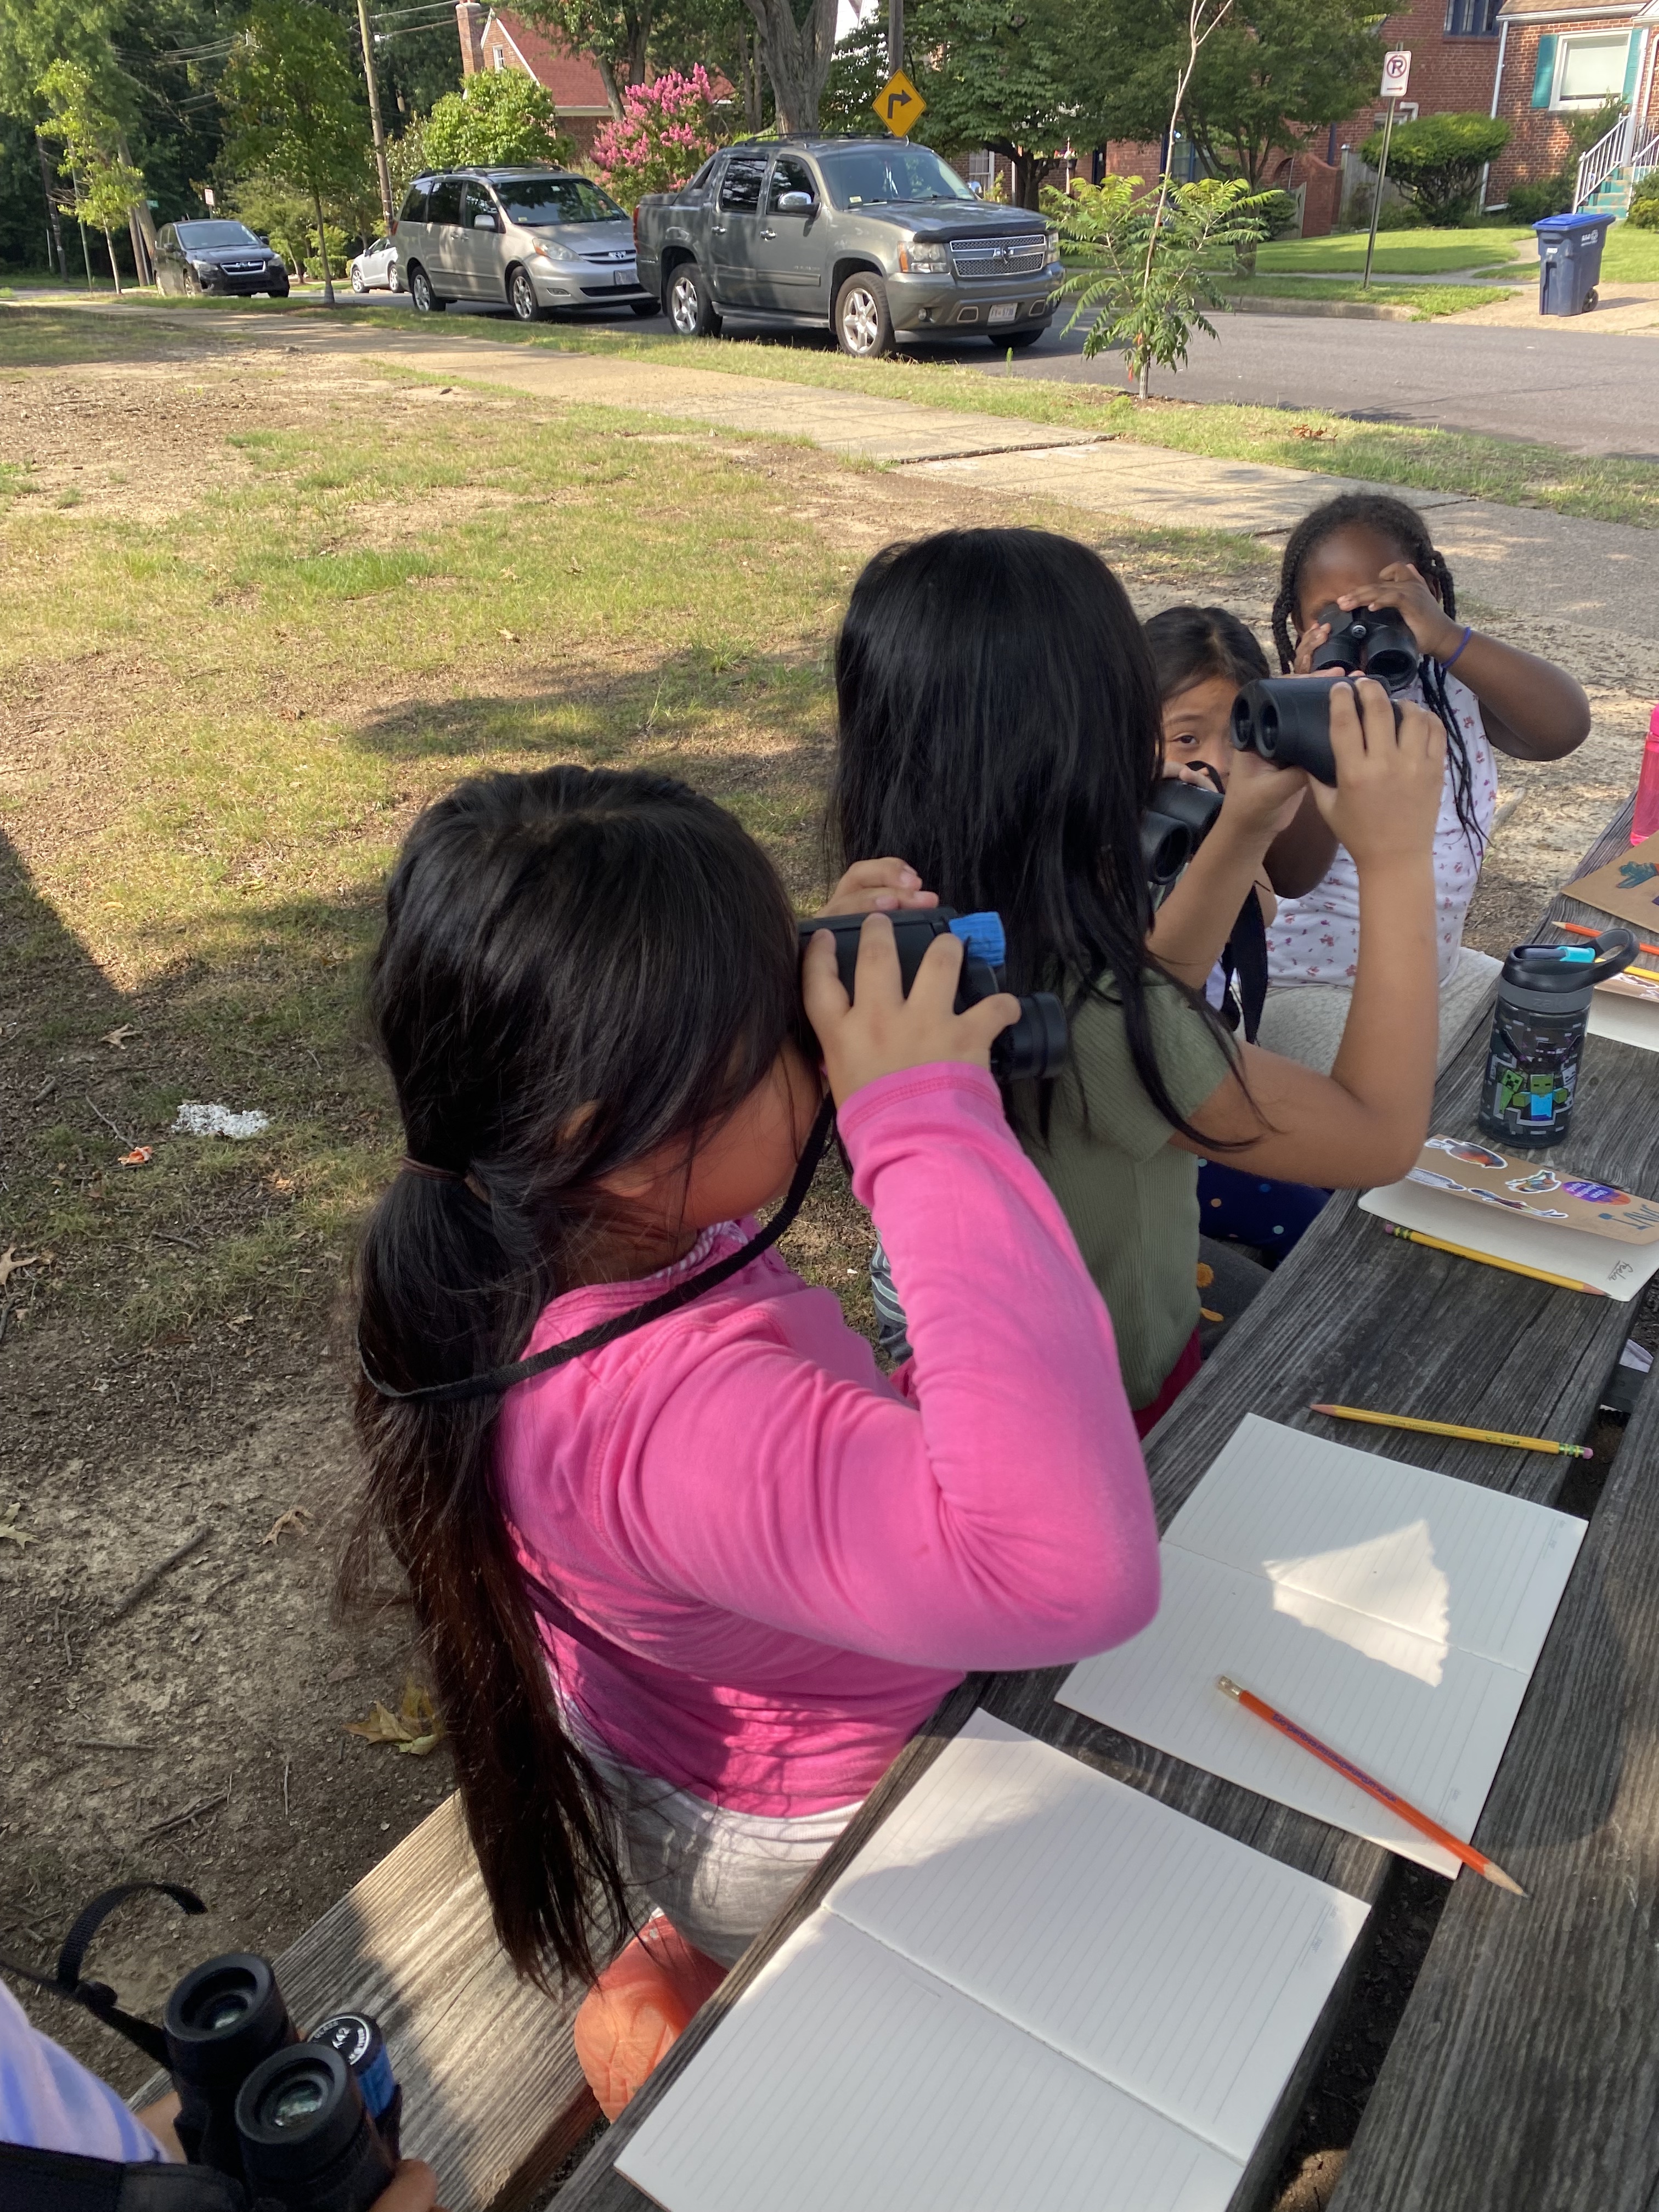 Kids sit at a picnic table and use binoculars to watch birds